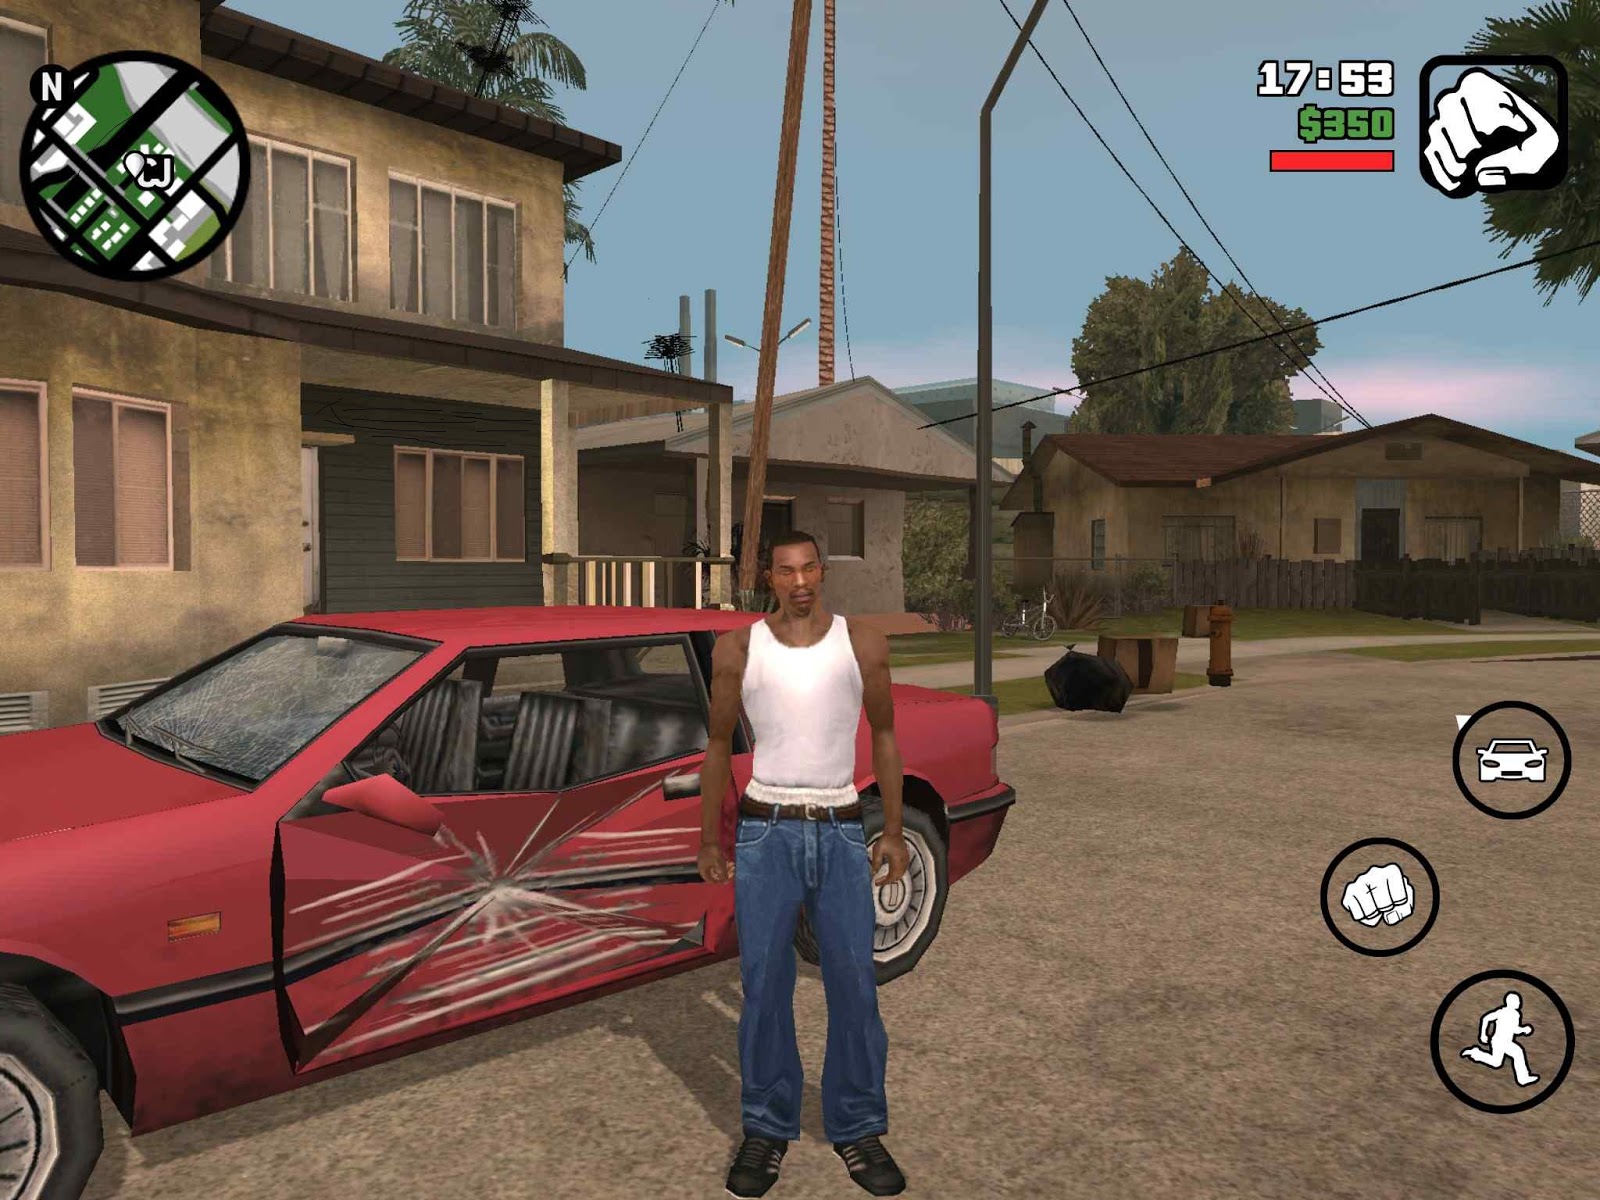 gta san andreas full game download for android revdl